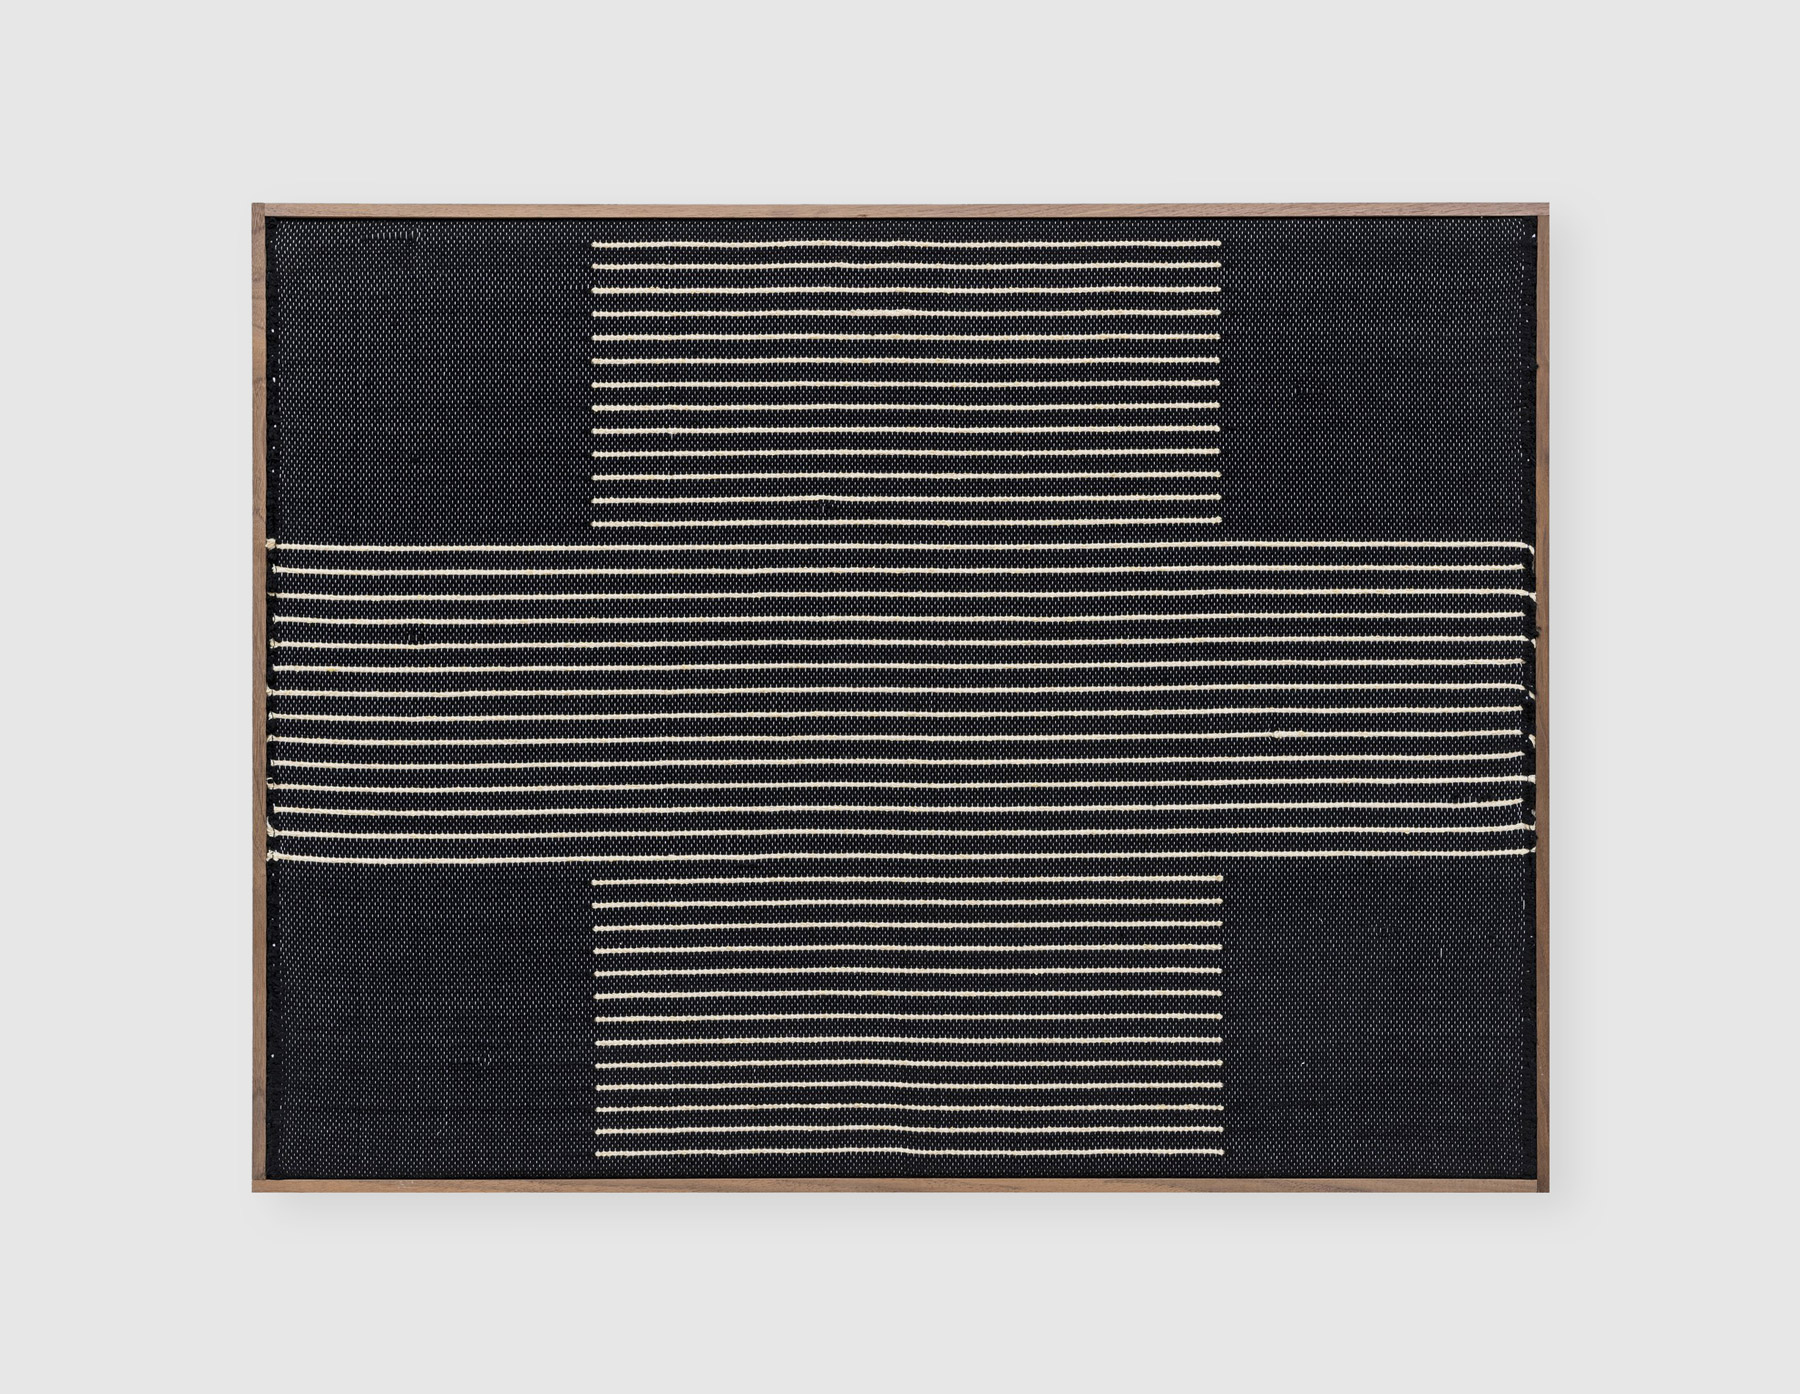 Brent Wadden, Untitled, 2018, handwoven fibers, wool, cotton and acrylic on canvas, 71 cm × 93 cm × 4 cm © Brent Wadden via Pace Gallery